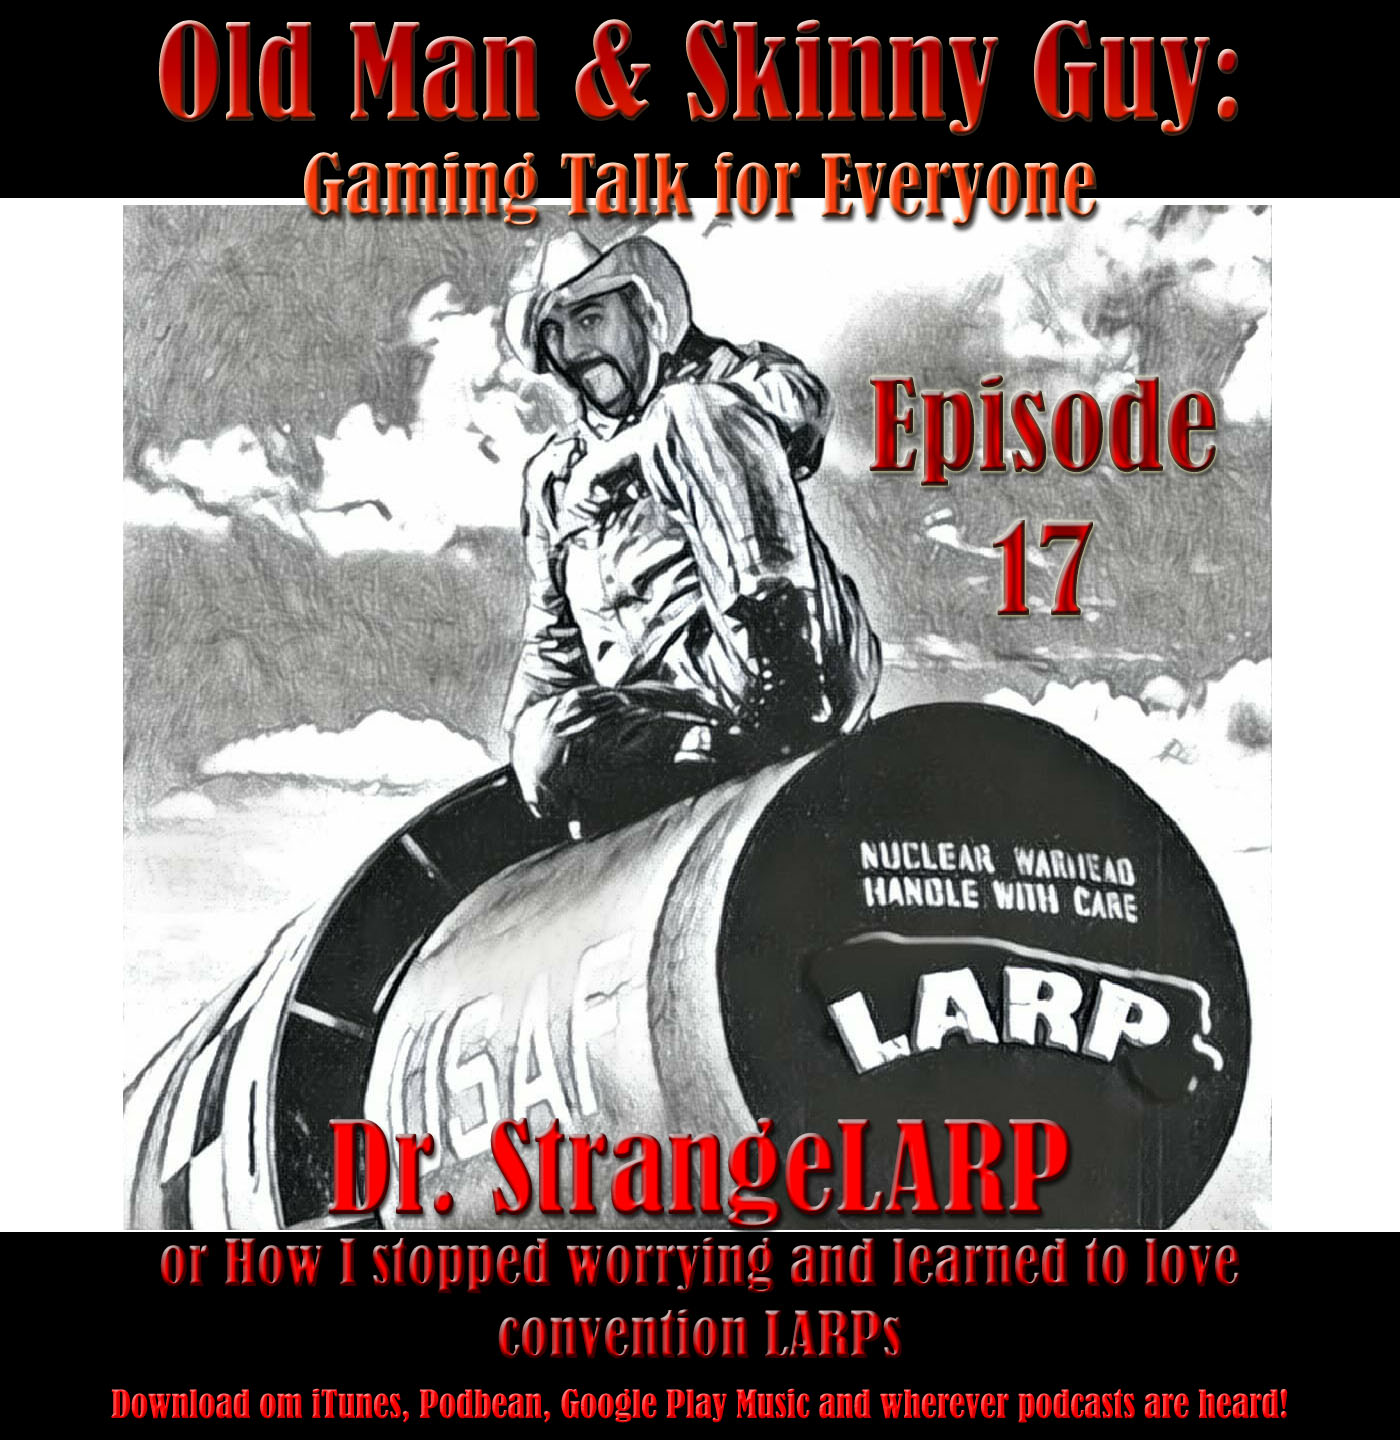 Episode 17: Dr. Strangelarp or How I stopped worrying and learned to love convention LARPs